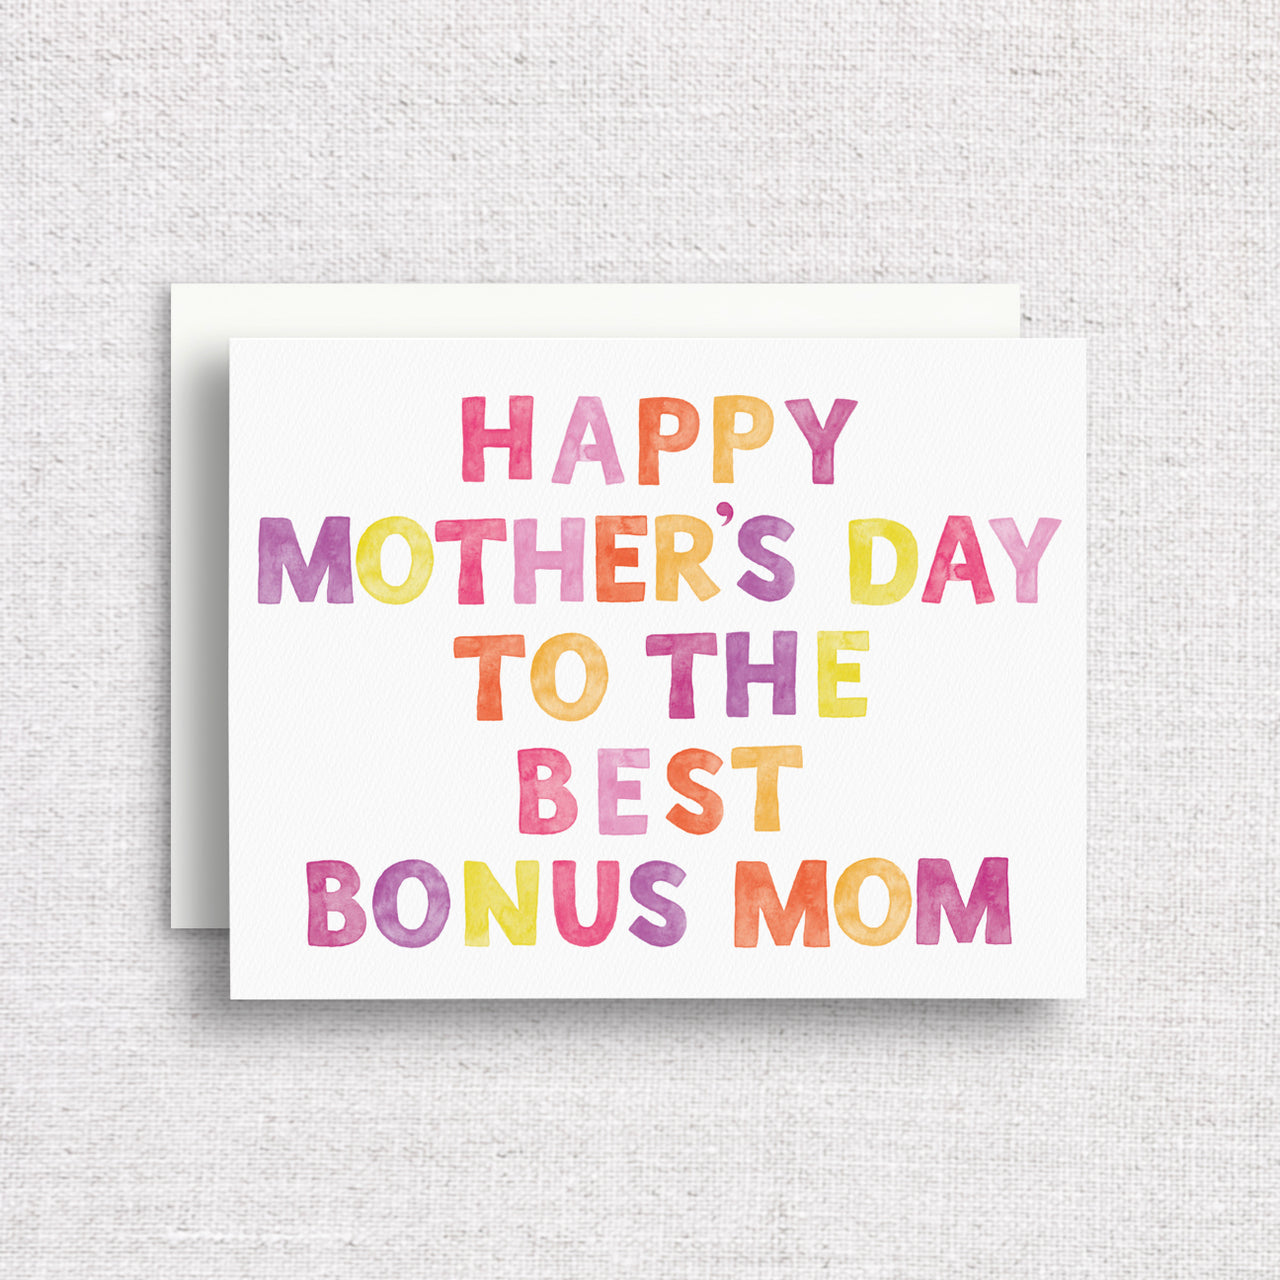 Happy Mother's Day to the Best Bonus Mom Greeting Card by Gert & Co